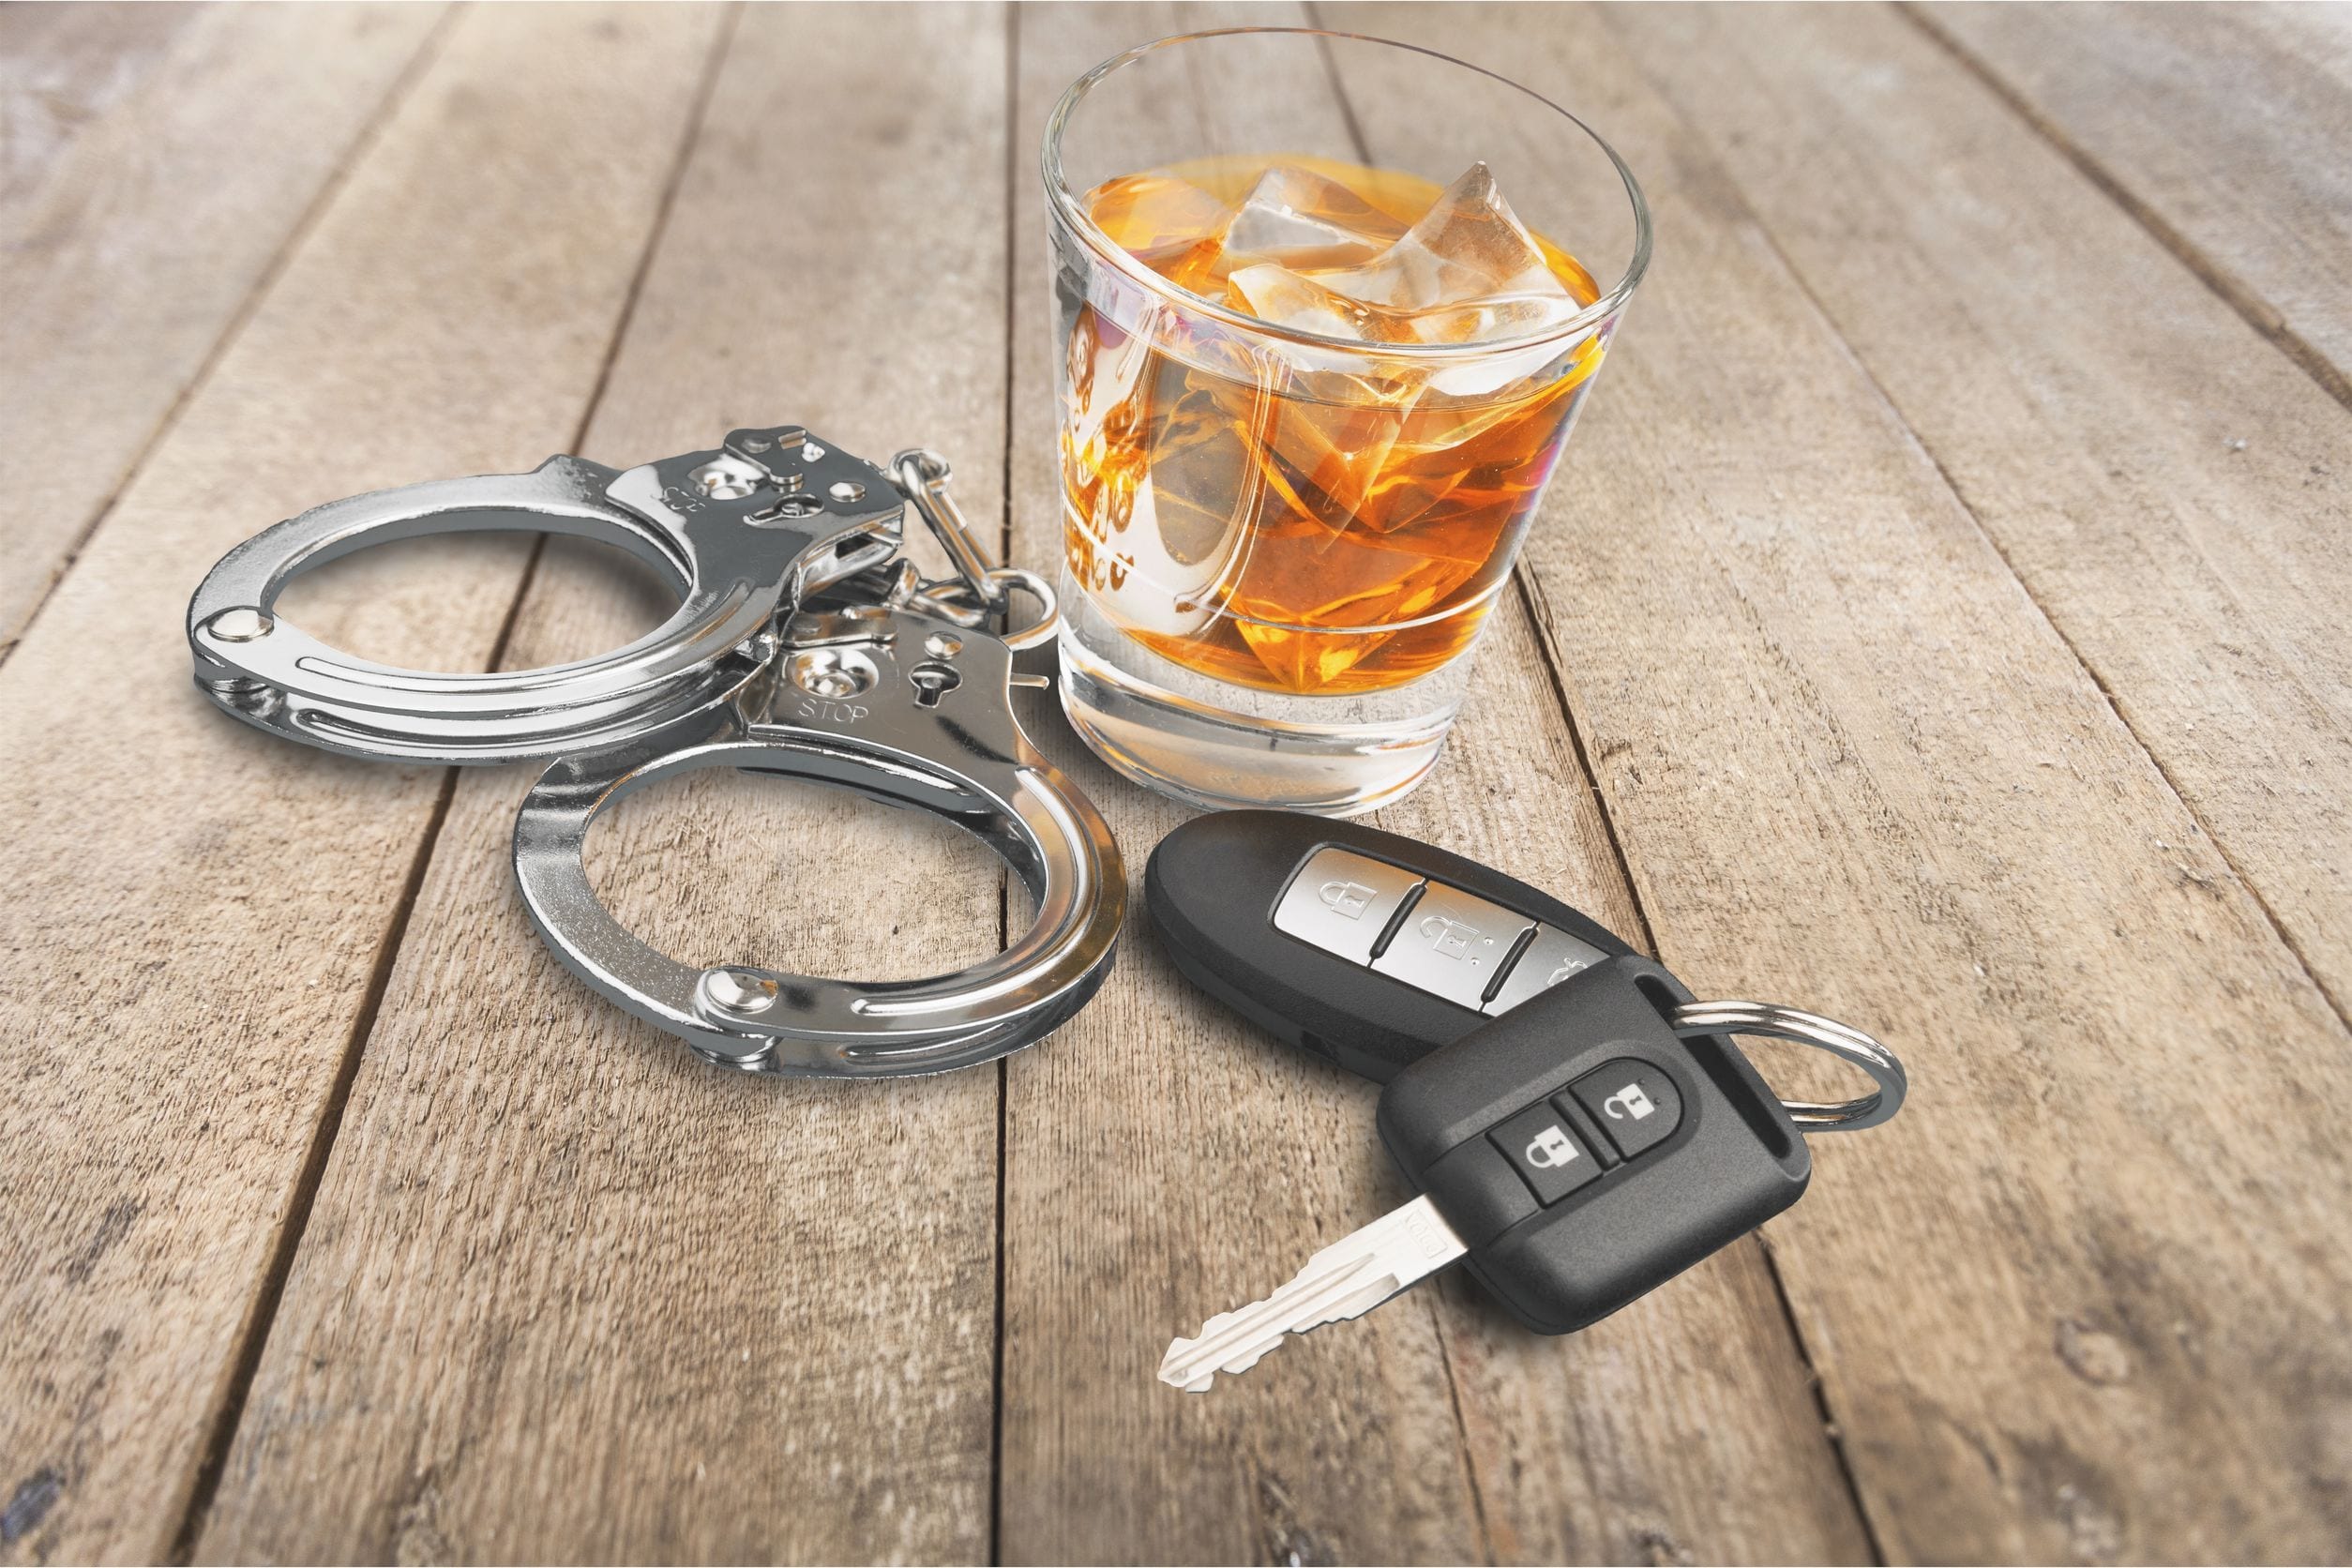 Chicago Woman Facing 15 Years for No Probation for DUI Charges